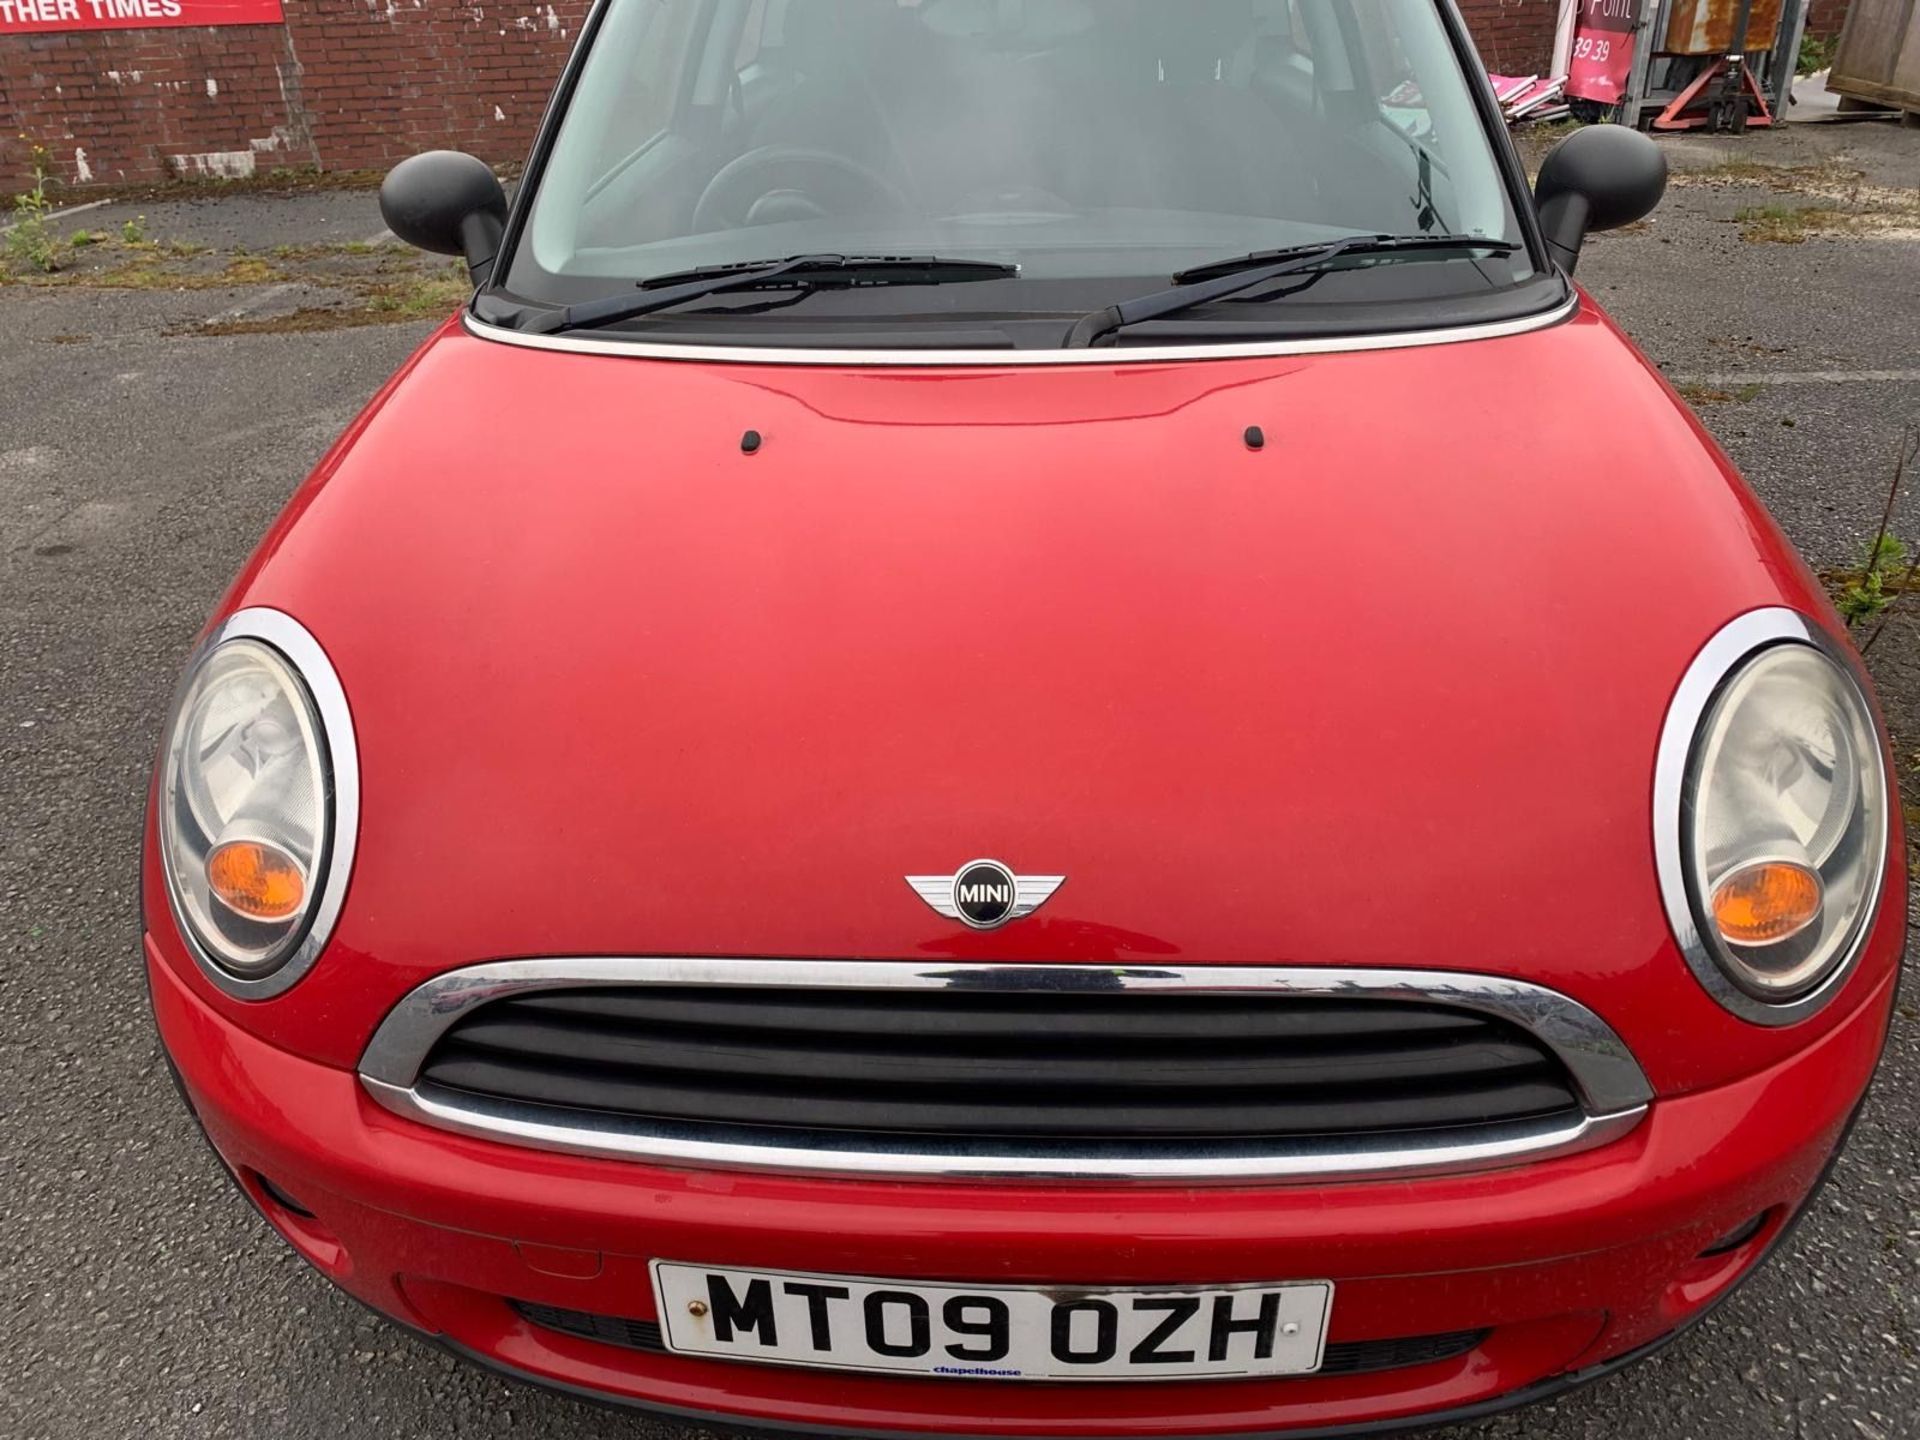 MT09 OZH MINI ONE-  RED PETROL MOT: 24.10.24 First Registration: 17.07.09 - Image 2 of 6